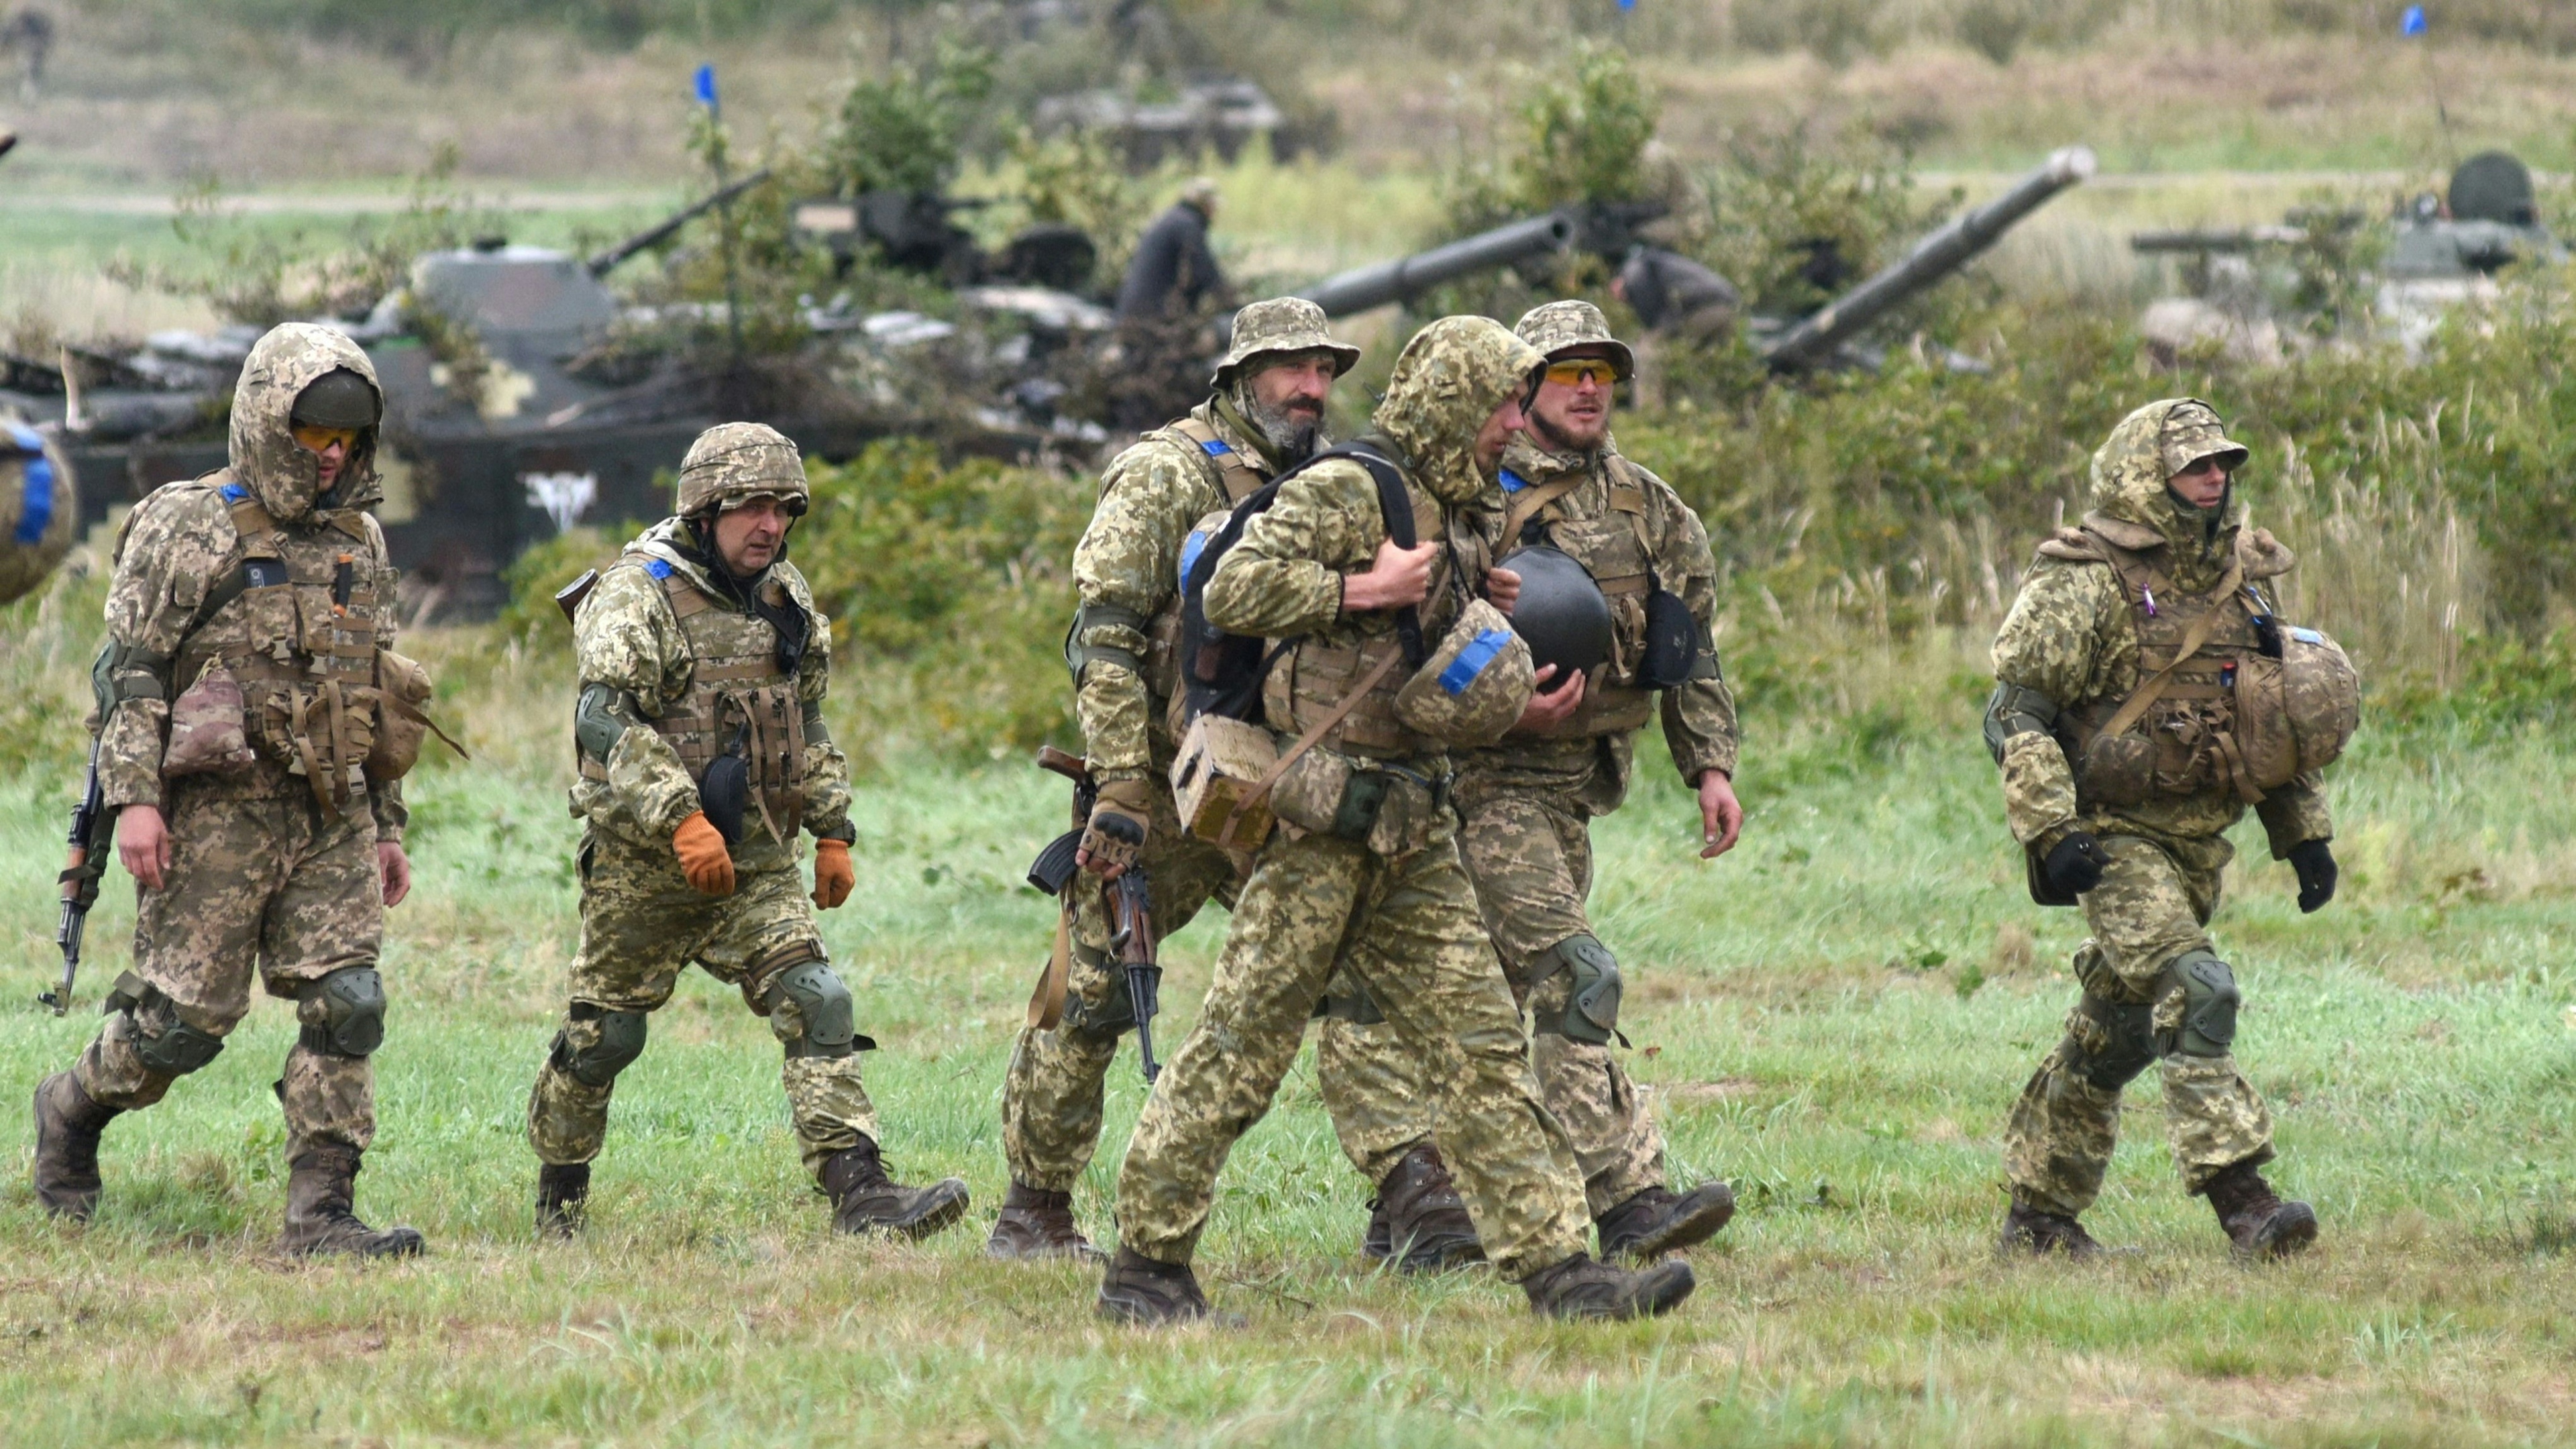 Ukrainian servicemen take part in the joint Rapid Trident military exercises with the United States and other NATO countries 